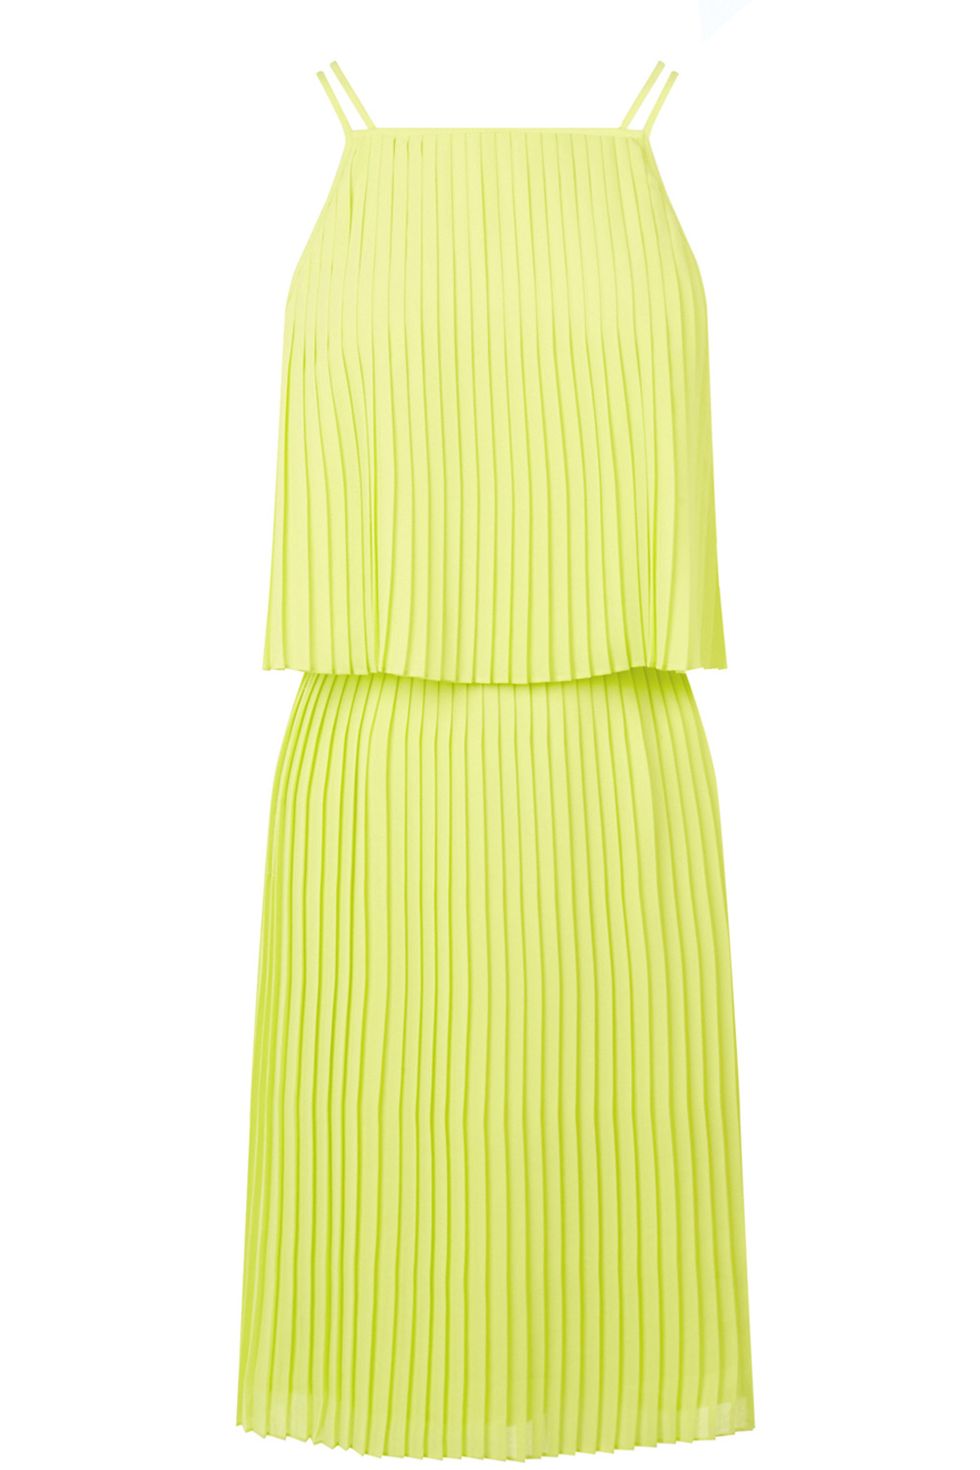 This yellow dress from Warehouse is perfect for spring weddings